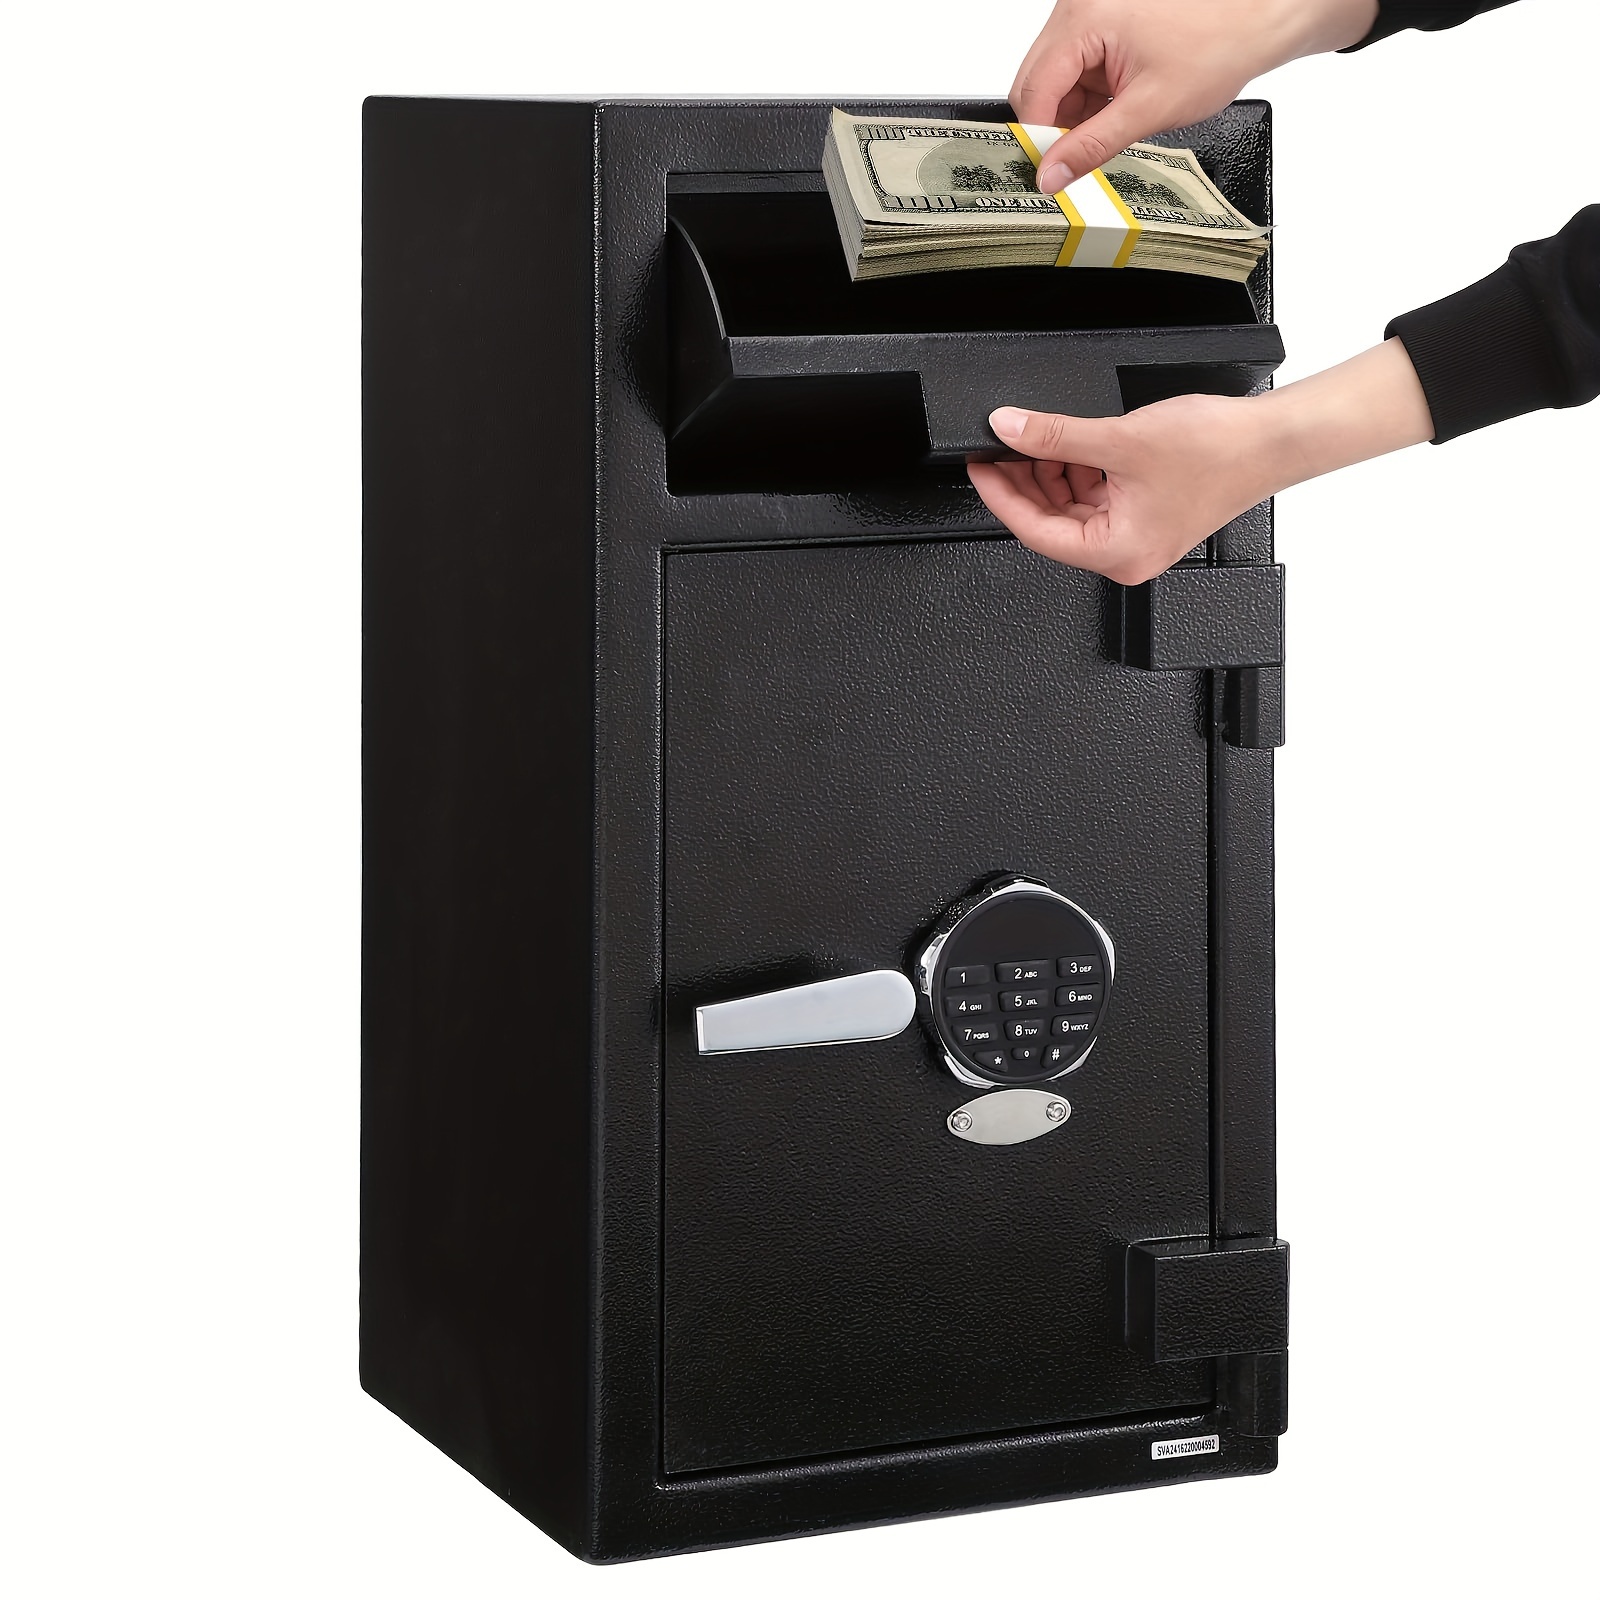 

Digital Depository Safe Box With Keypad Electronic Steel Safe With Deposit Slot And 2 Emergency Keys For Home Hotel Restaurant And Office (15.7'' X 13.7'' X 19.2'')